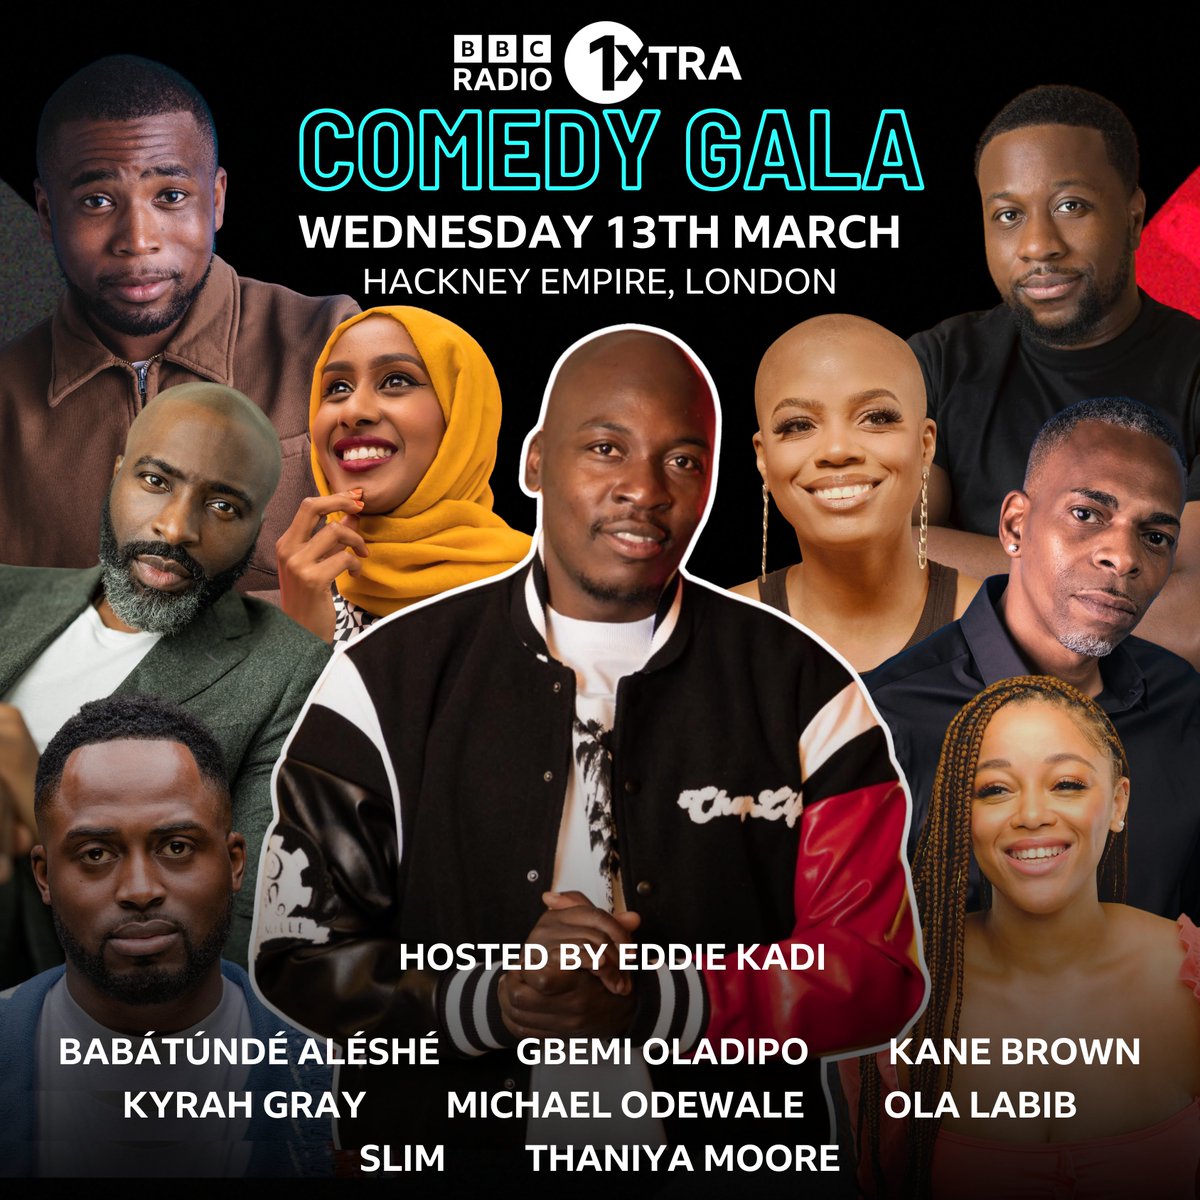 .@BabatundeComedy, @kanebrown, @TheOlaLabib, @SLIMcomedian, @ThanyiaMoore and more perform in the @1Xtra Comedy Gala, hosted by @EddieKadi, at the @HackneyEmpire tonight